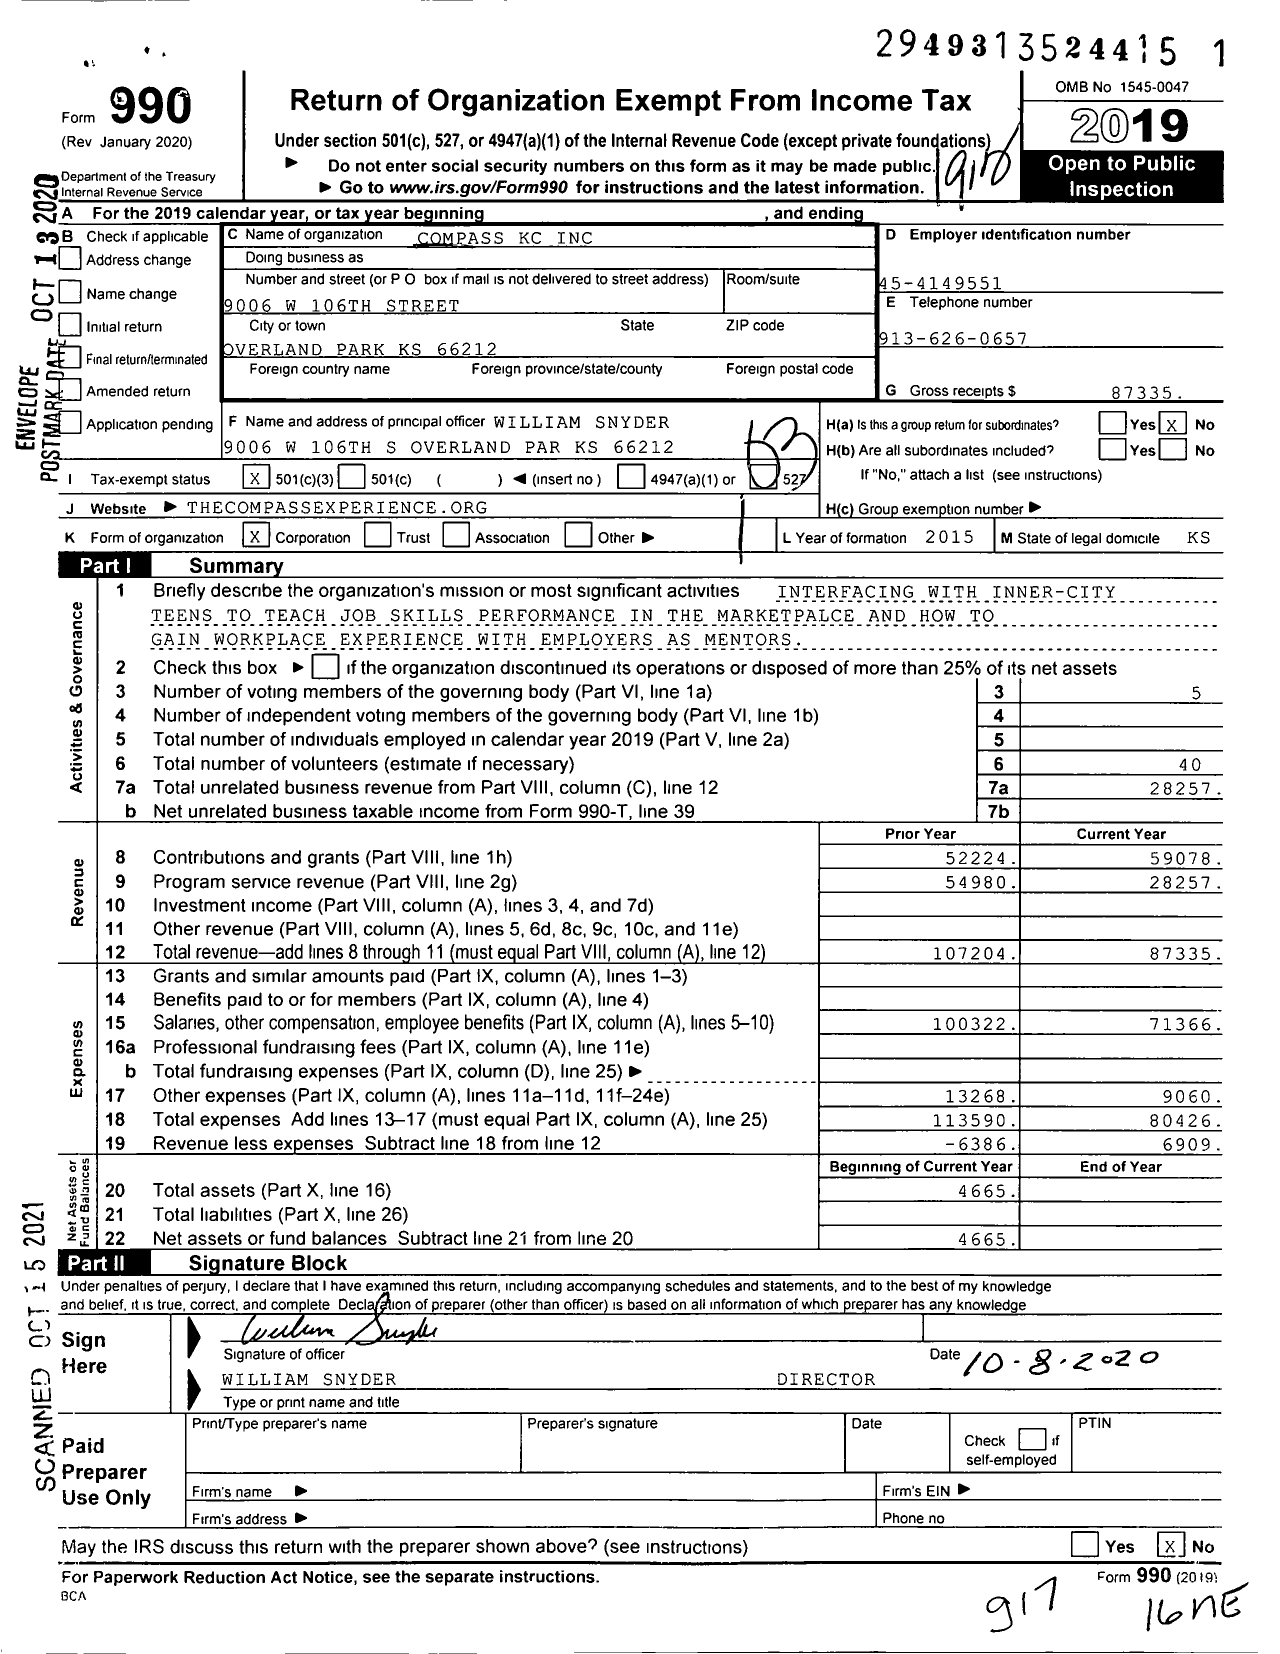 Image of first page of 2019 Form 990 for Compass KC